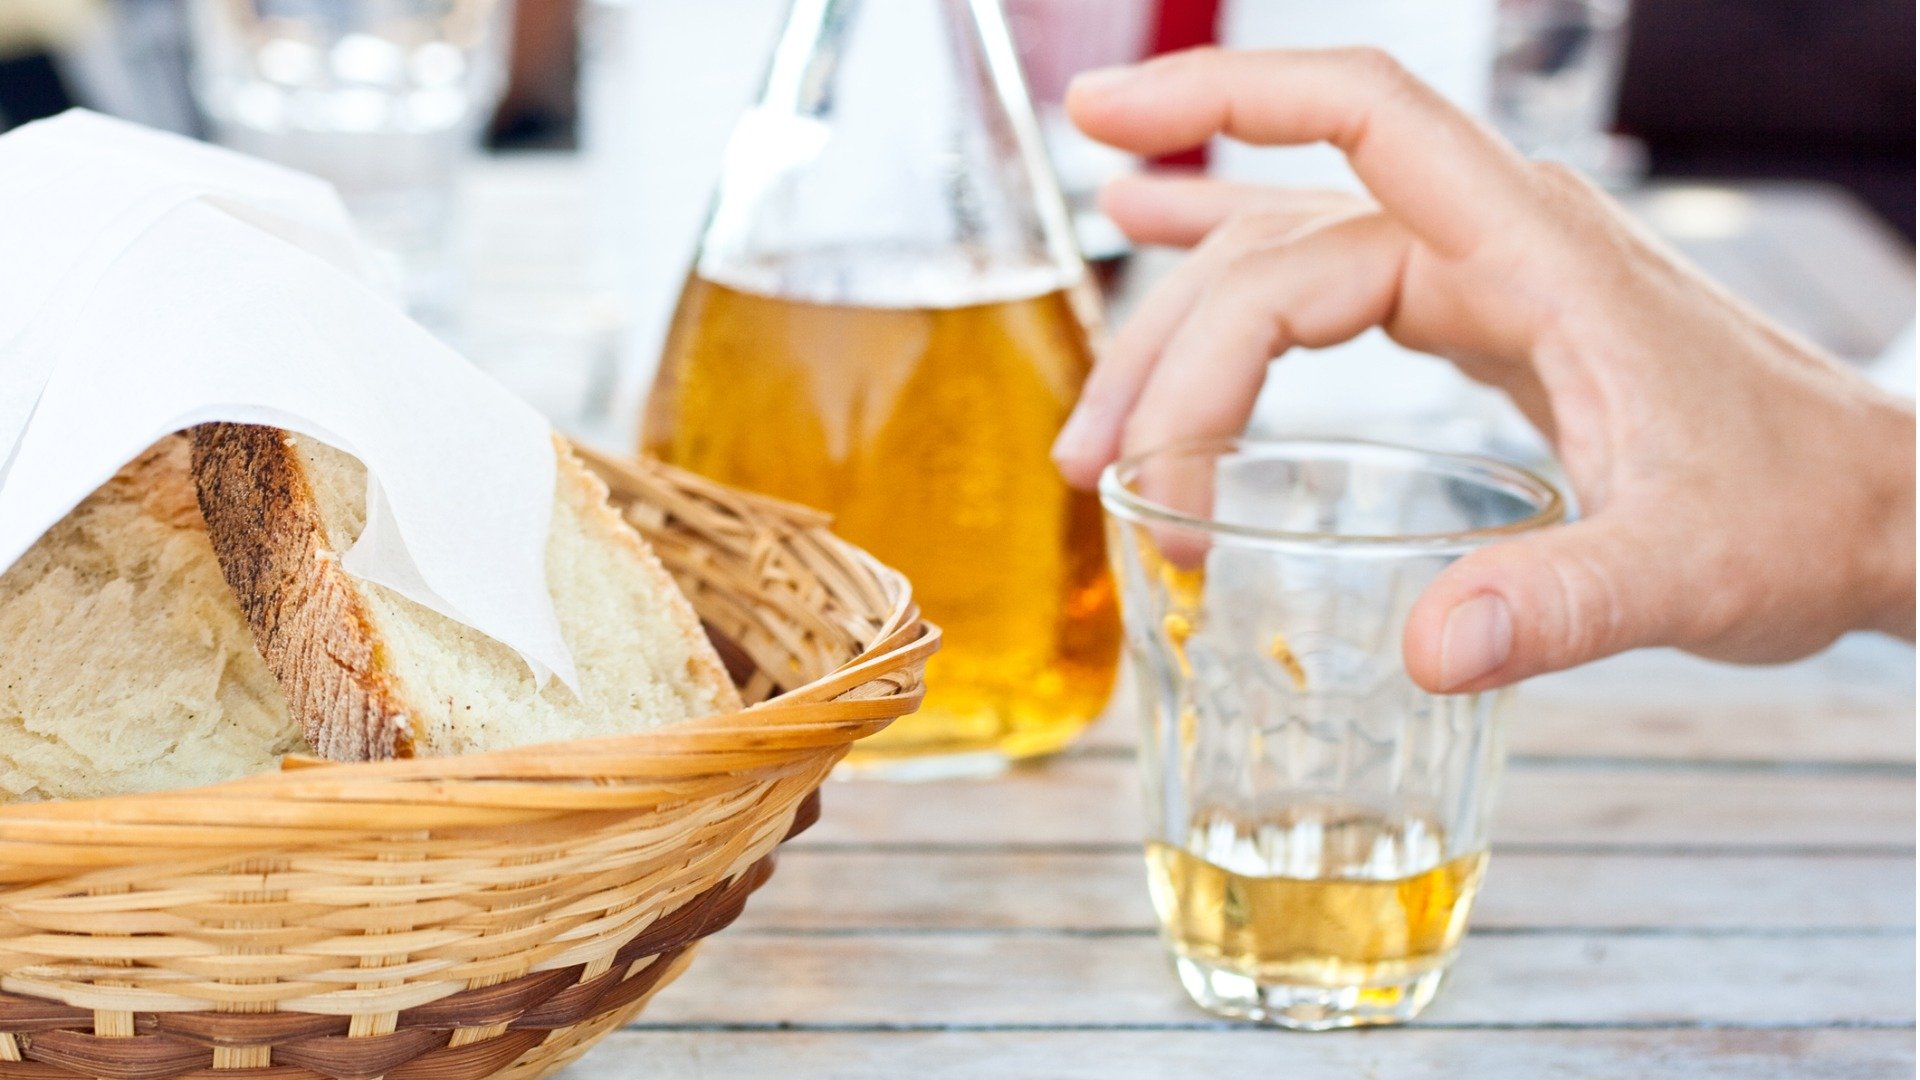 This is a close up of a basket filled with bread and someone's hand holding a glass of Greek retsina wine. In the background, a carafe of retsina. 